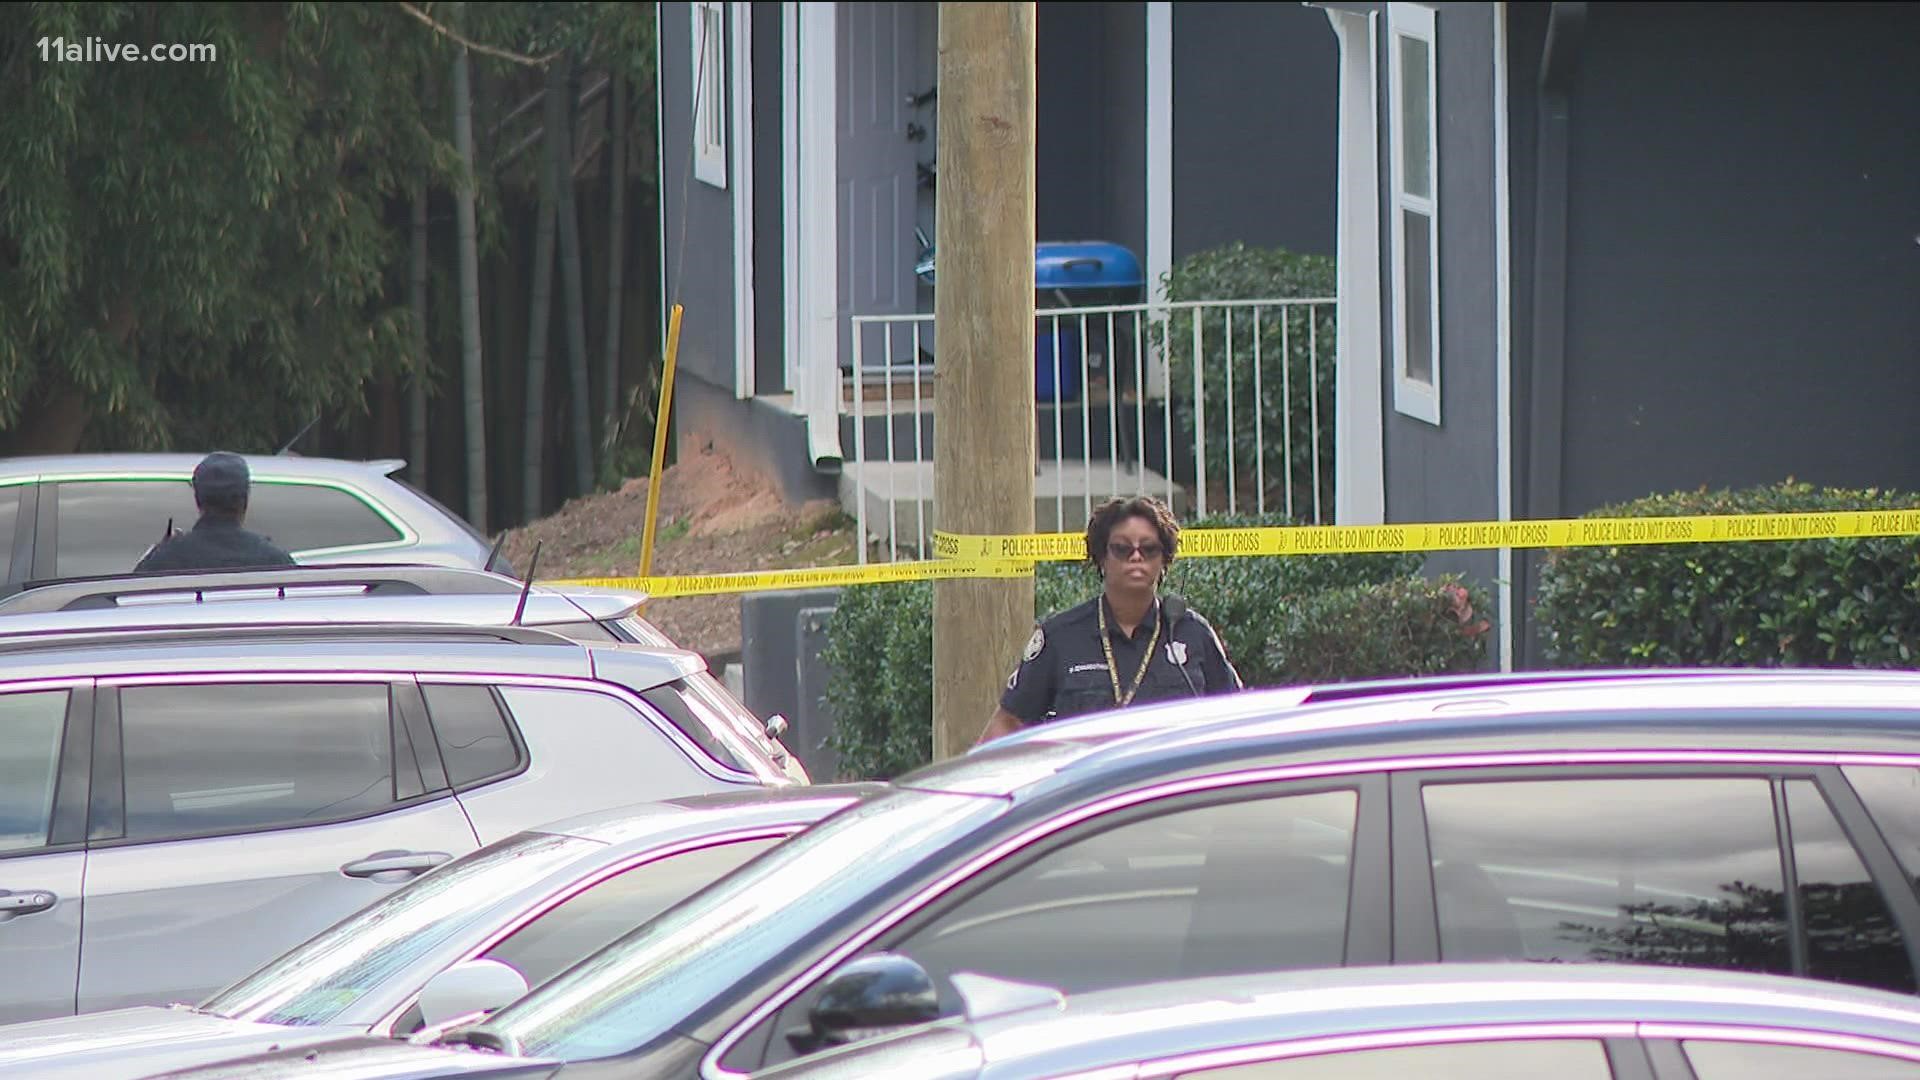 Atlanta Police are investigating a shooting that occurred on Holmes St. in northwest Atlanta.